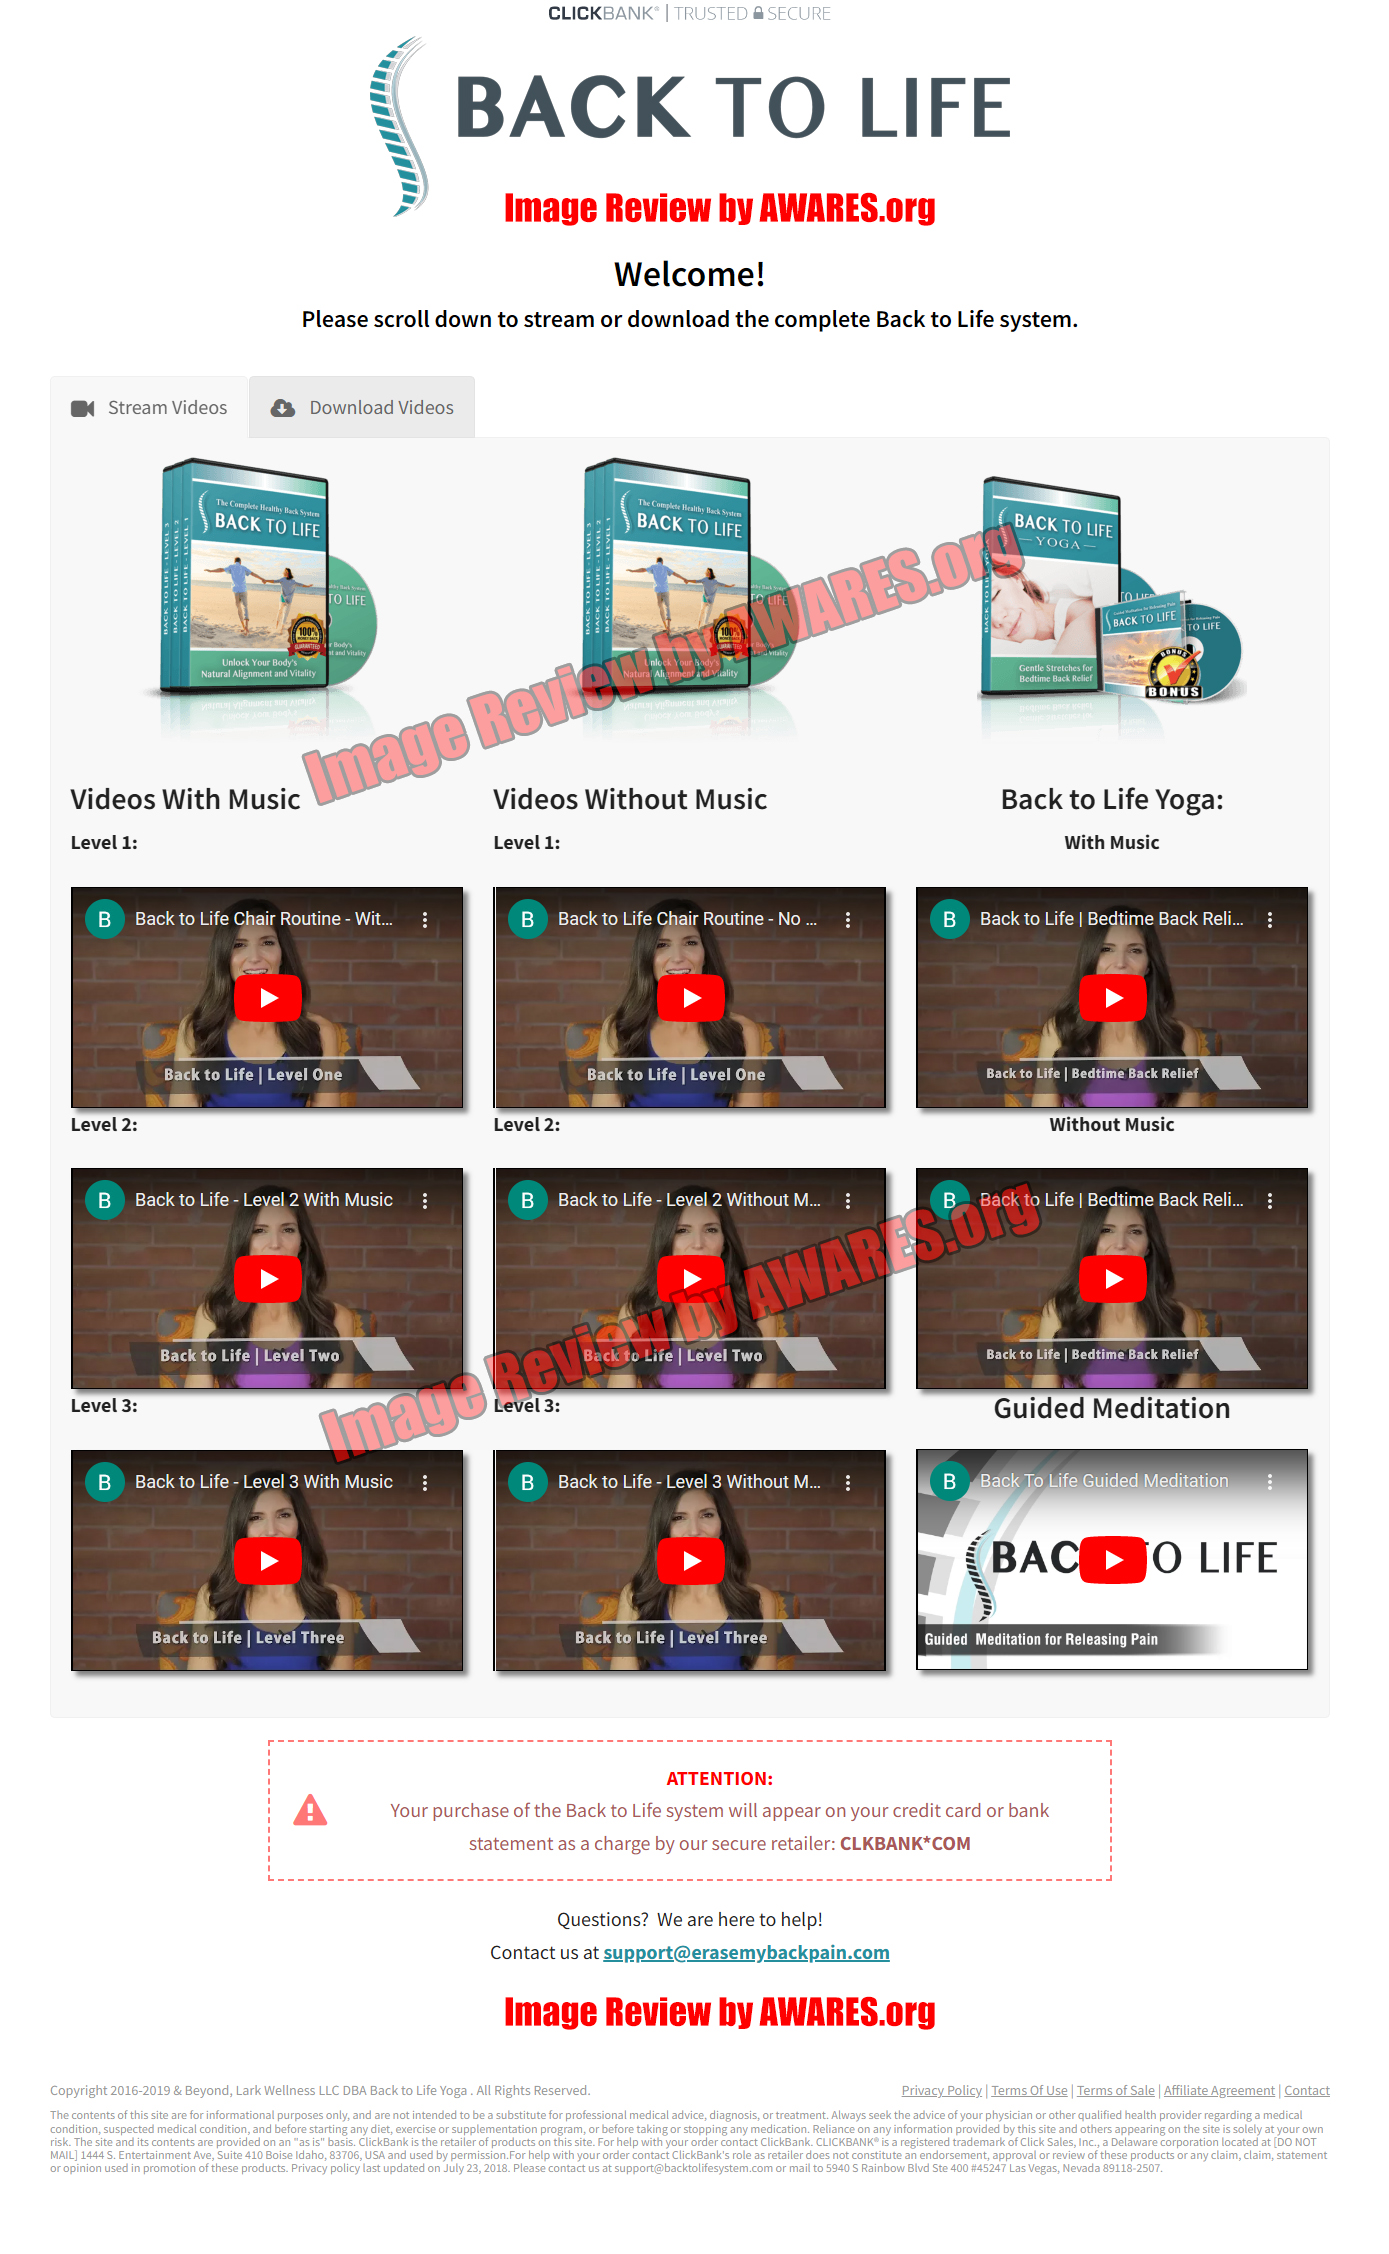 Back to Life Download Page